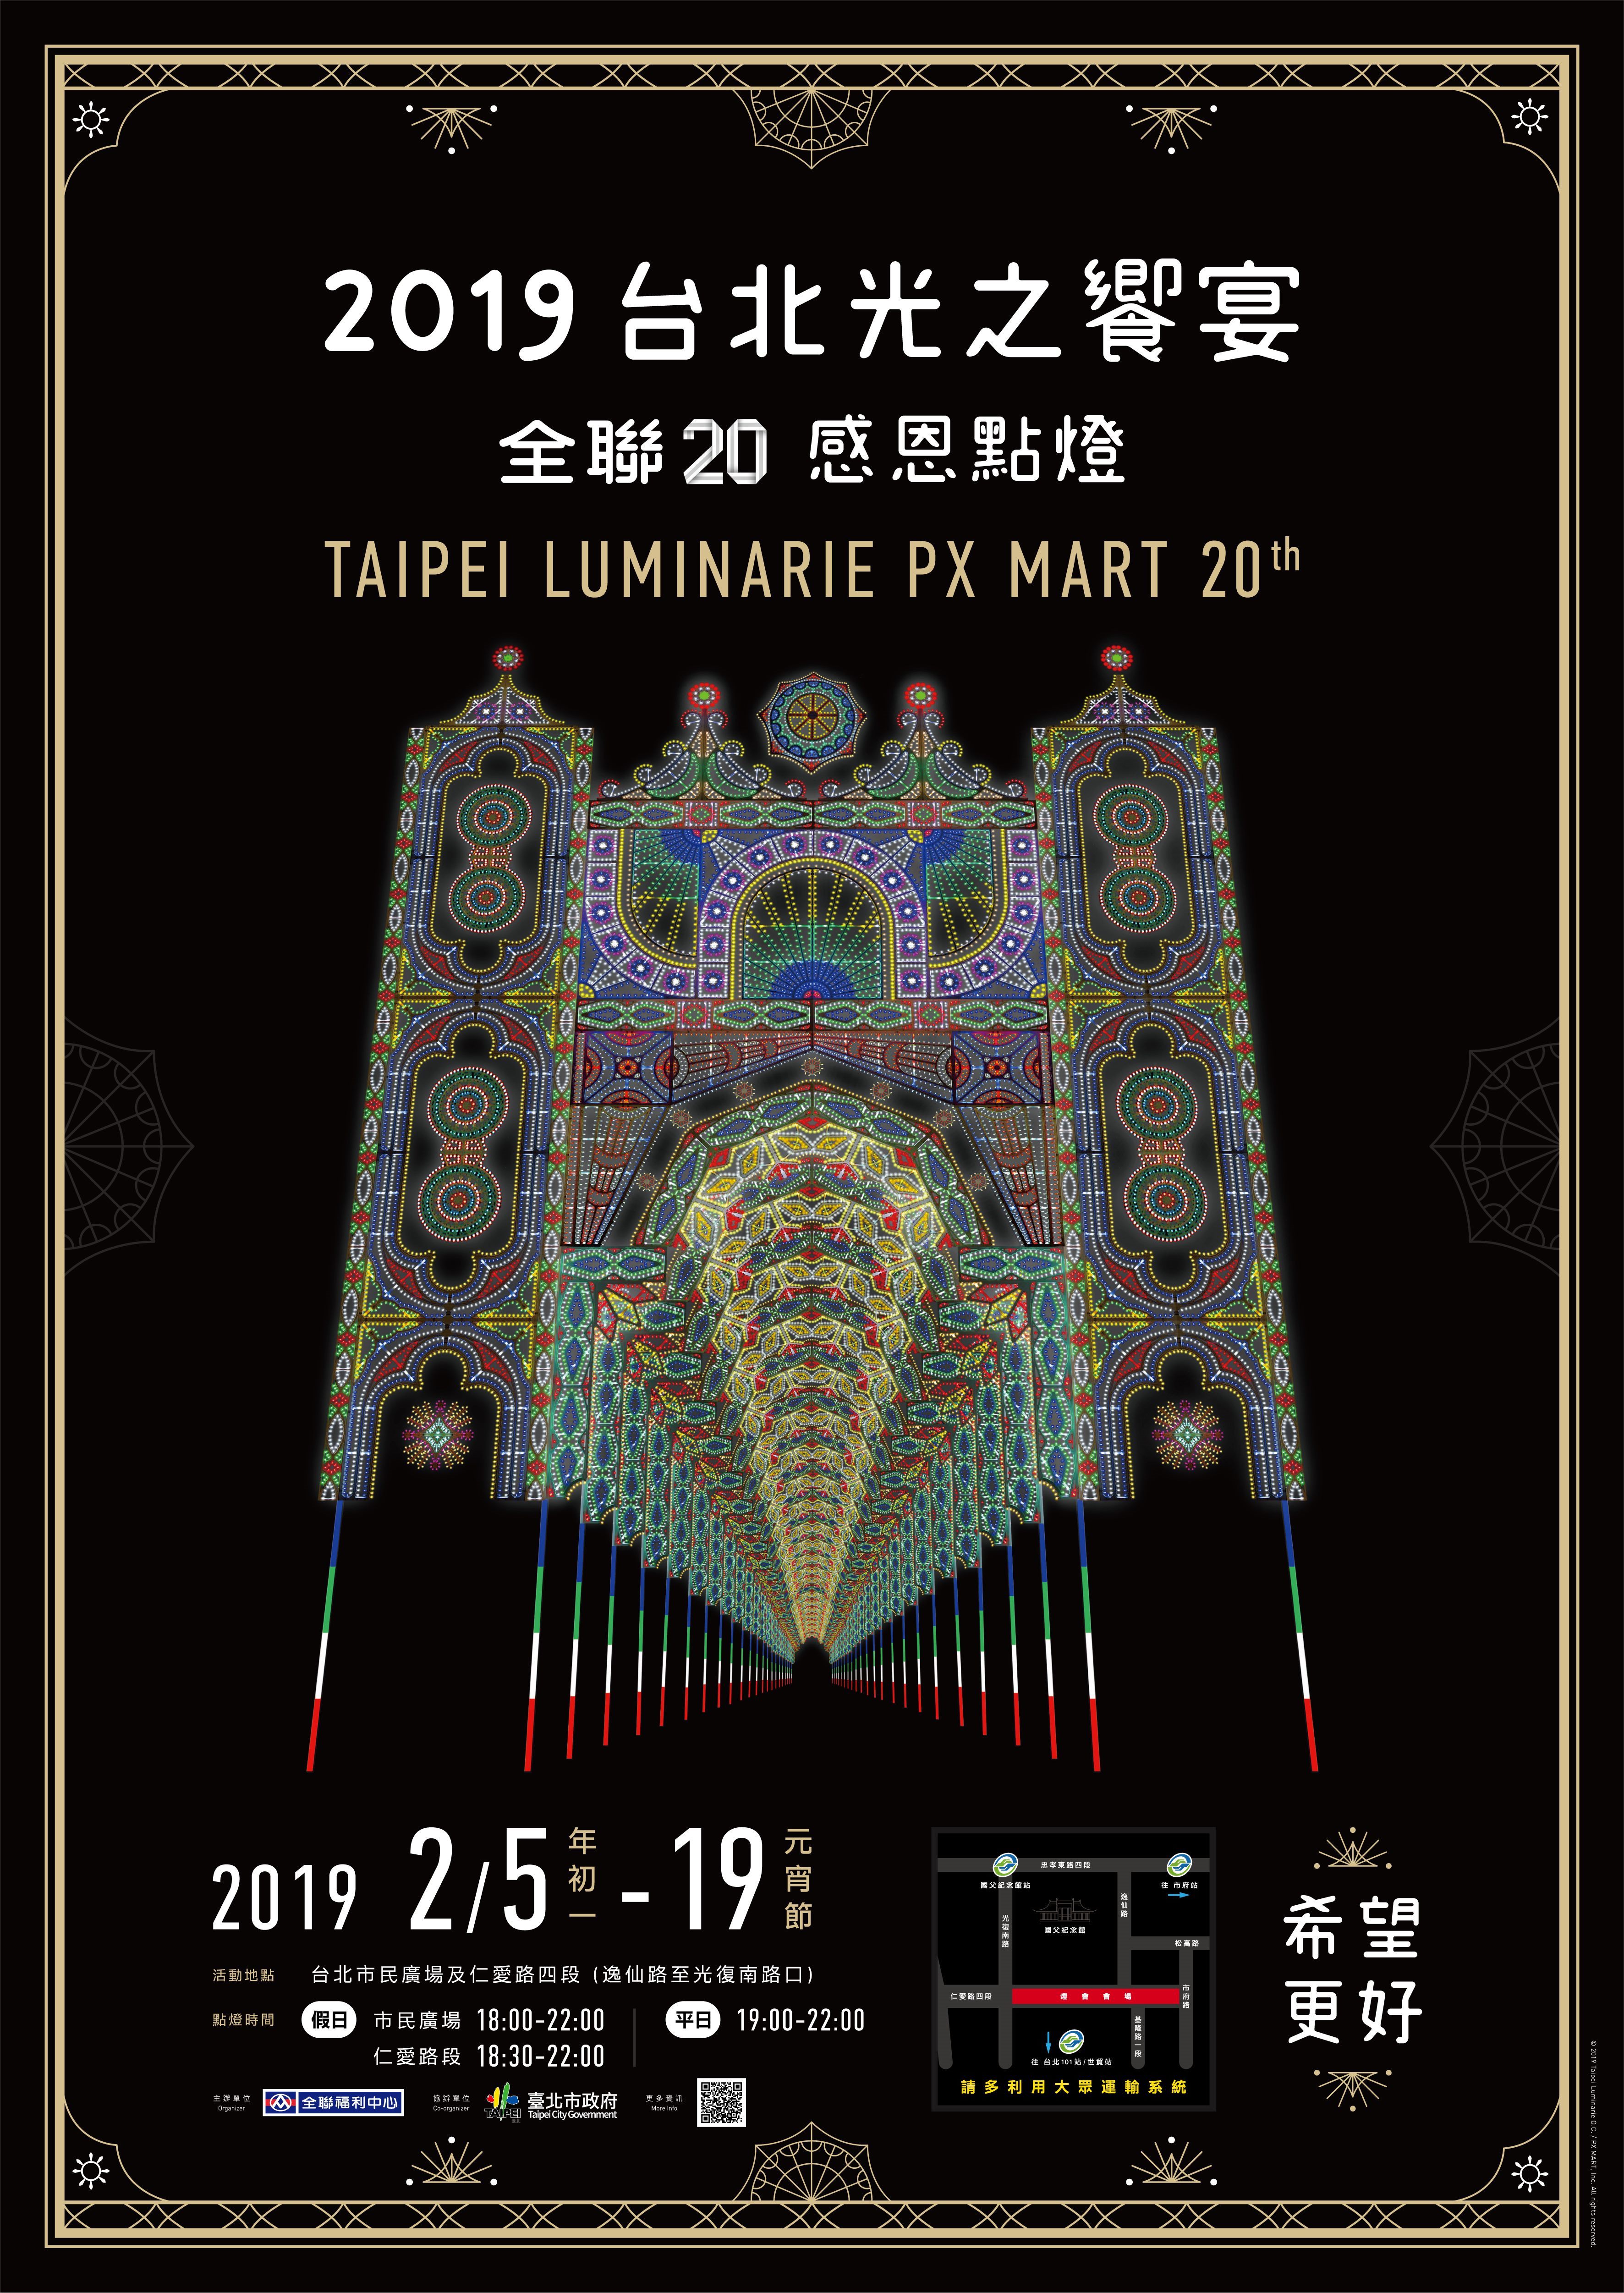 Dazzling Light Spectacle at the 2019 Taipei Luminarie